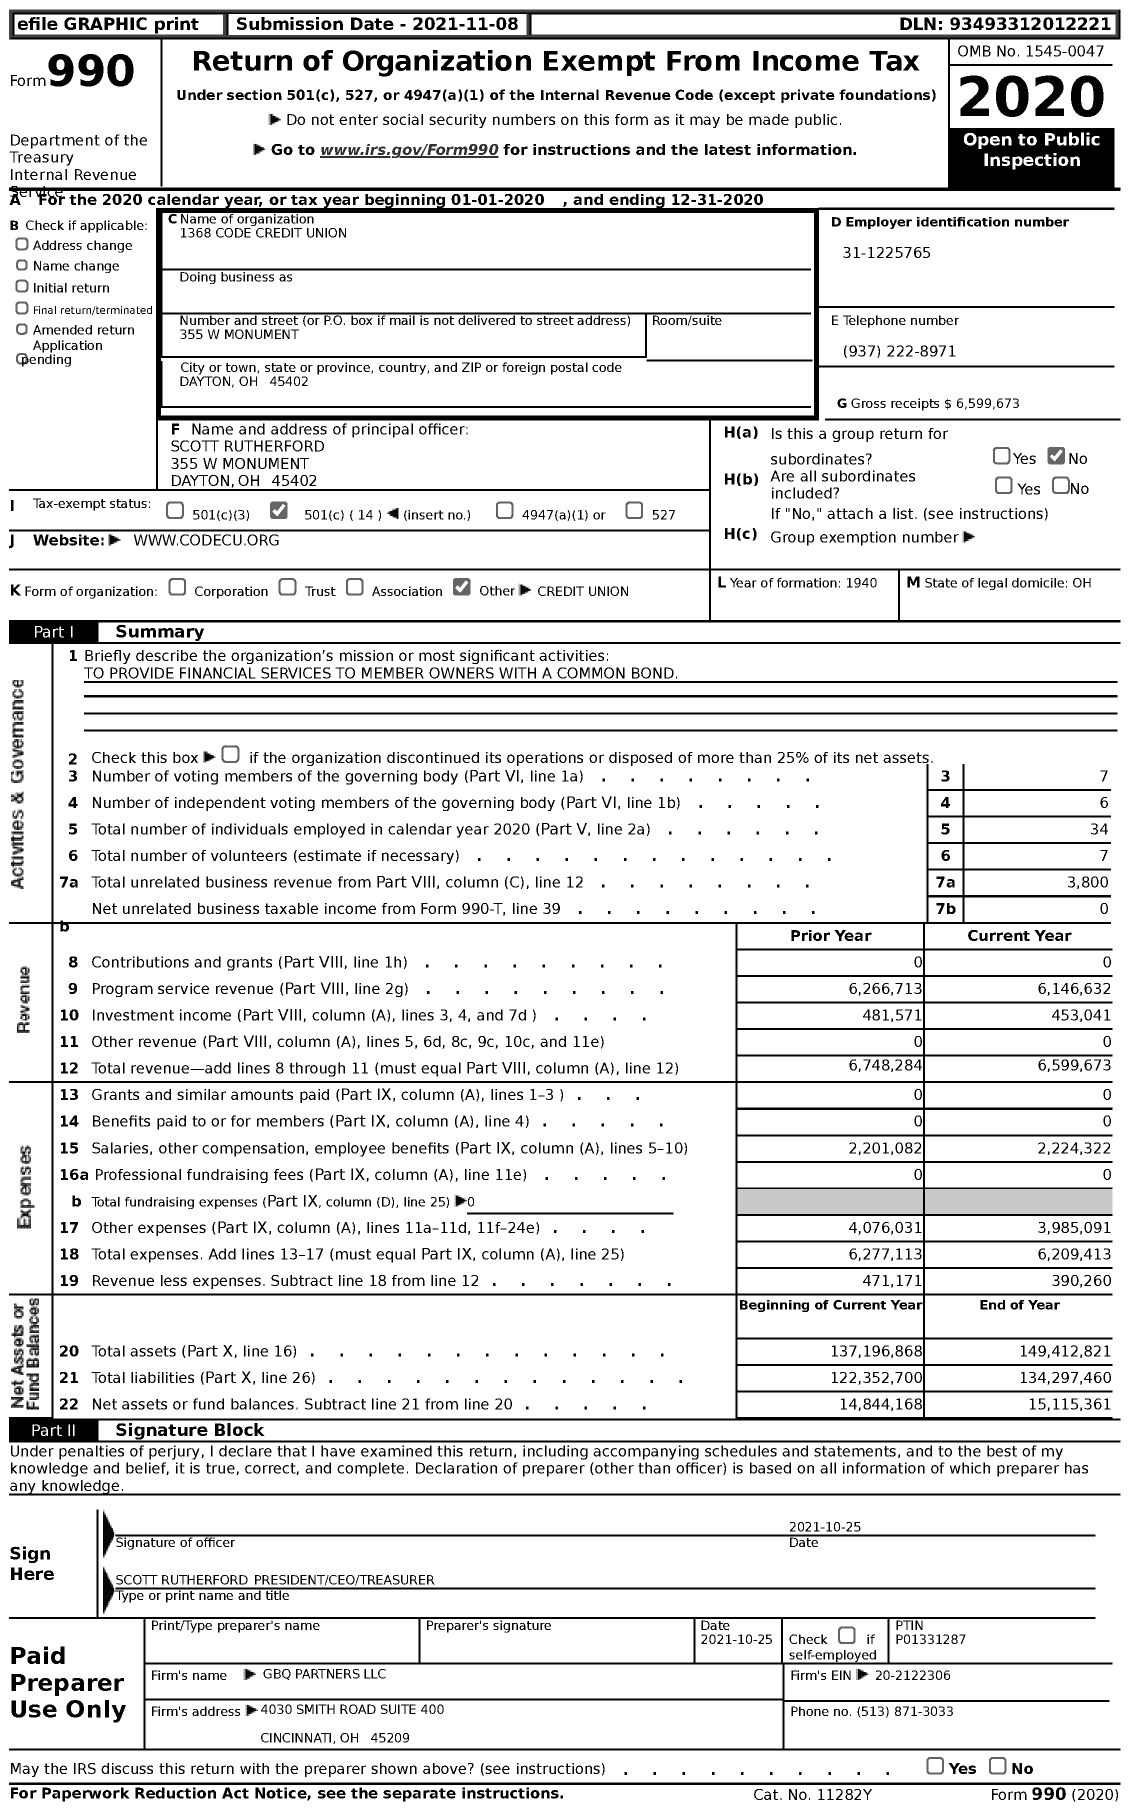 Image of first page of 2020 Form 990 for 1368 CODE Credit Union